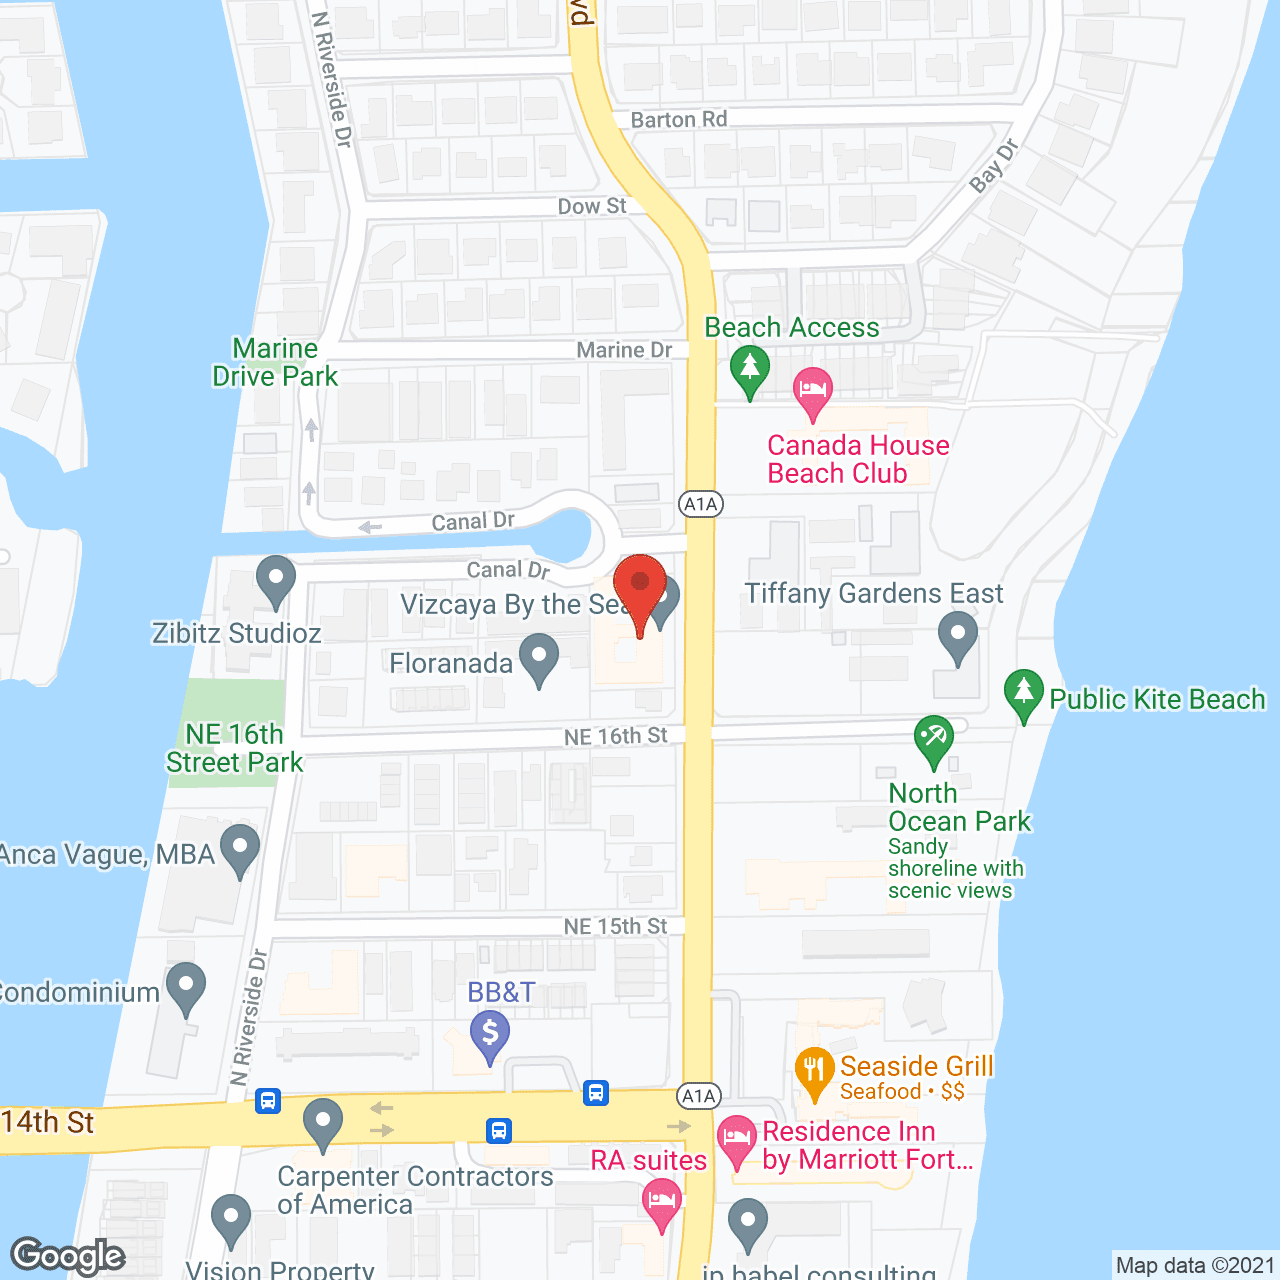 Vizcaya by the Sea in google map